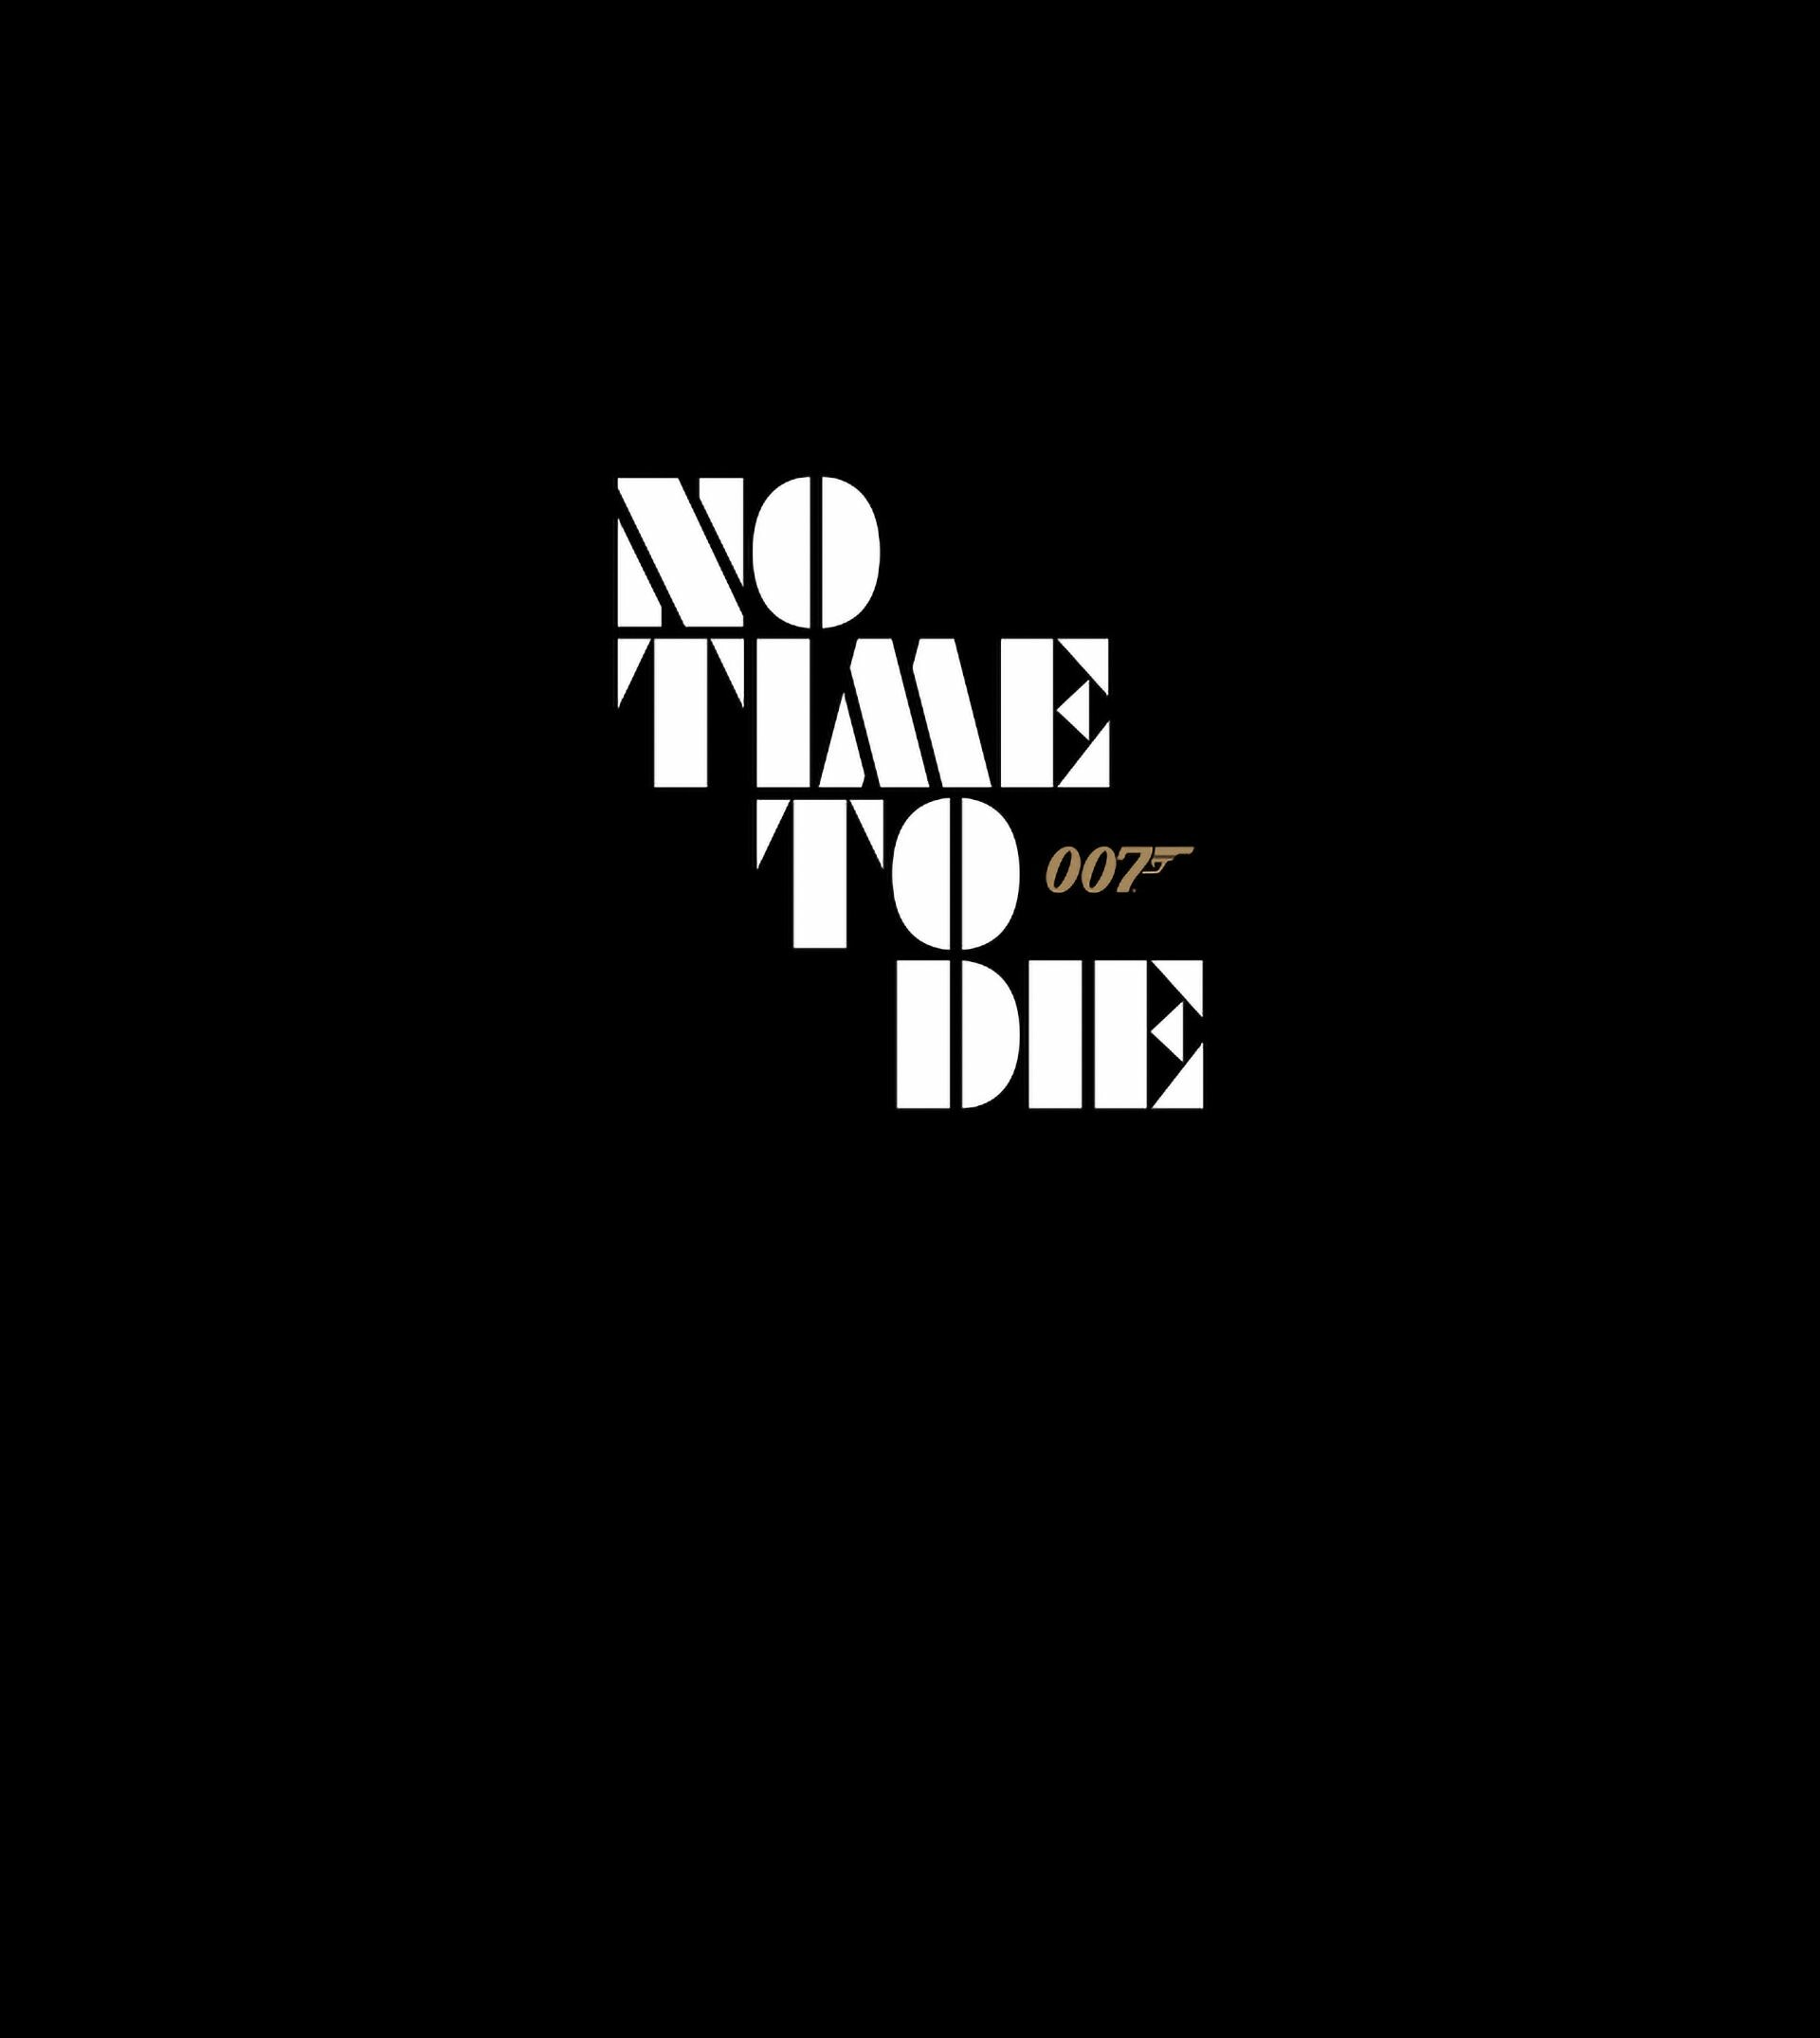 No Time to Die: The mission to rescue a kidnapped scientist turns out to be far more treacherous than expected, leading Bond onto the trail of a mysterious villain armed with dangerous new technology. 1920x2150 HD Wallpaper.